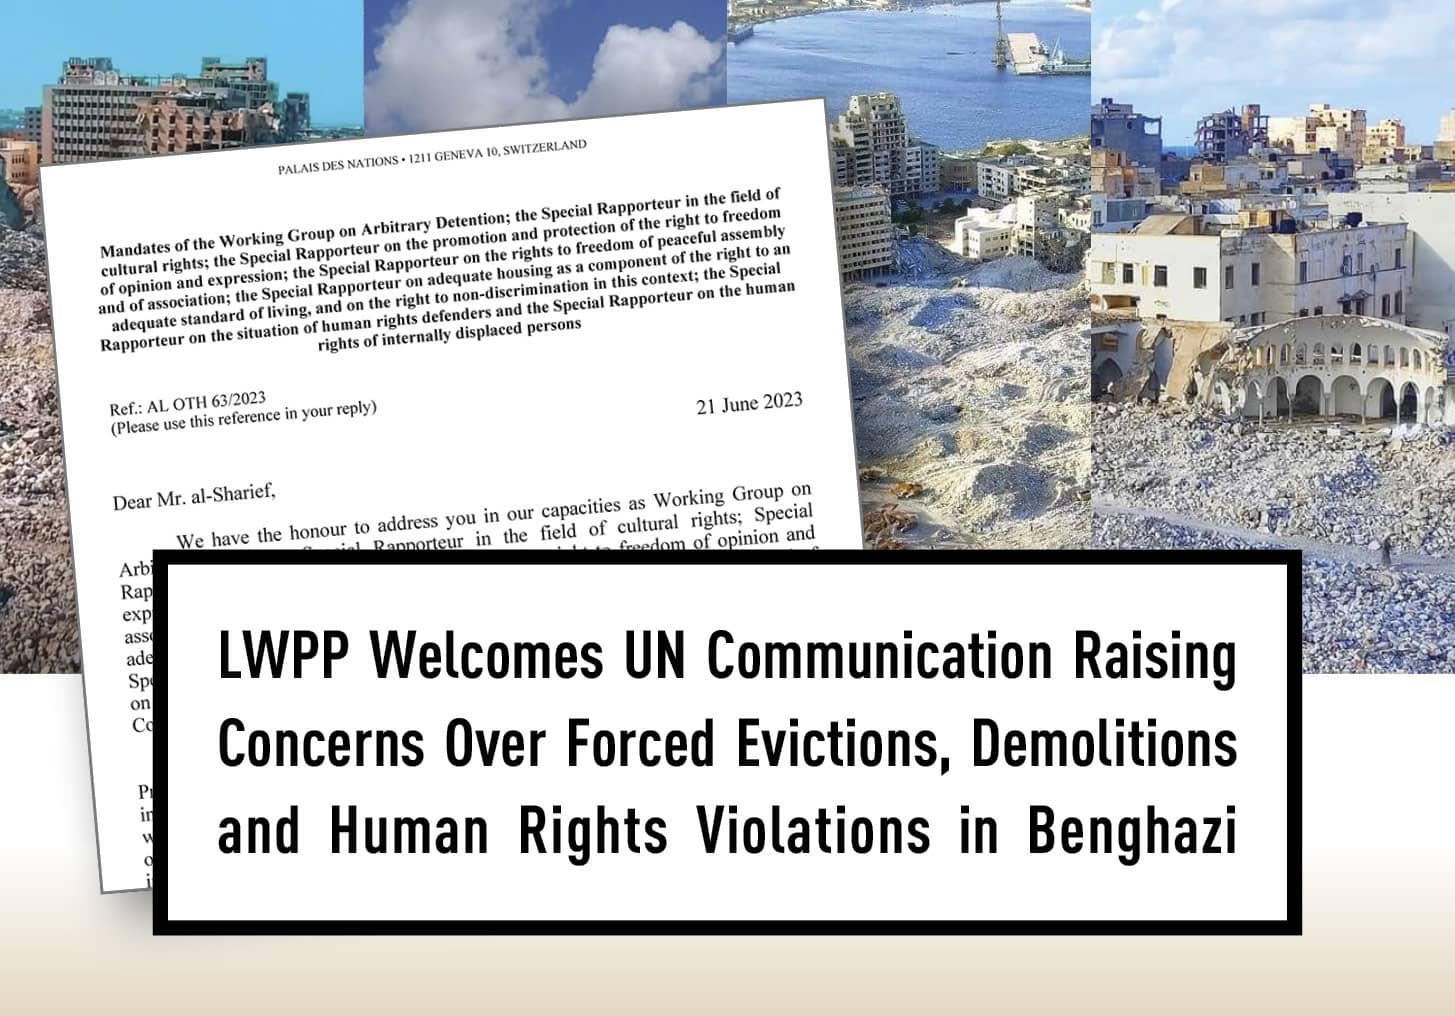 LWPP Welcomes UN Communication Raising Concerns Over Forced Evictions and Demolitions in Benghazi